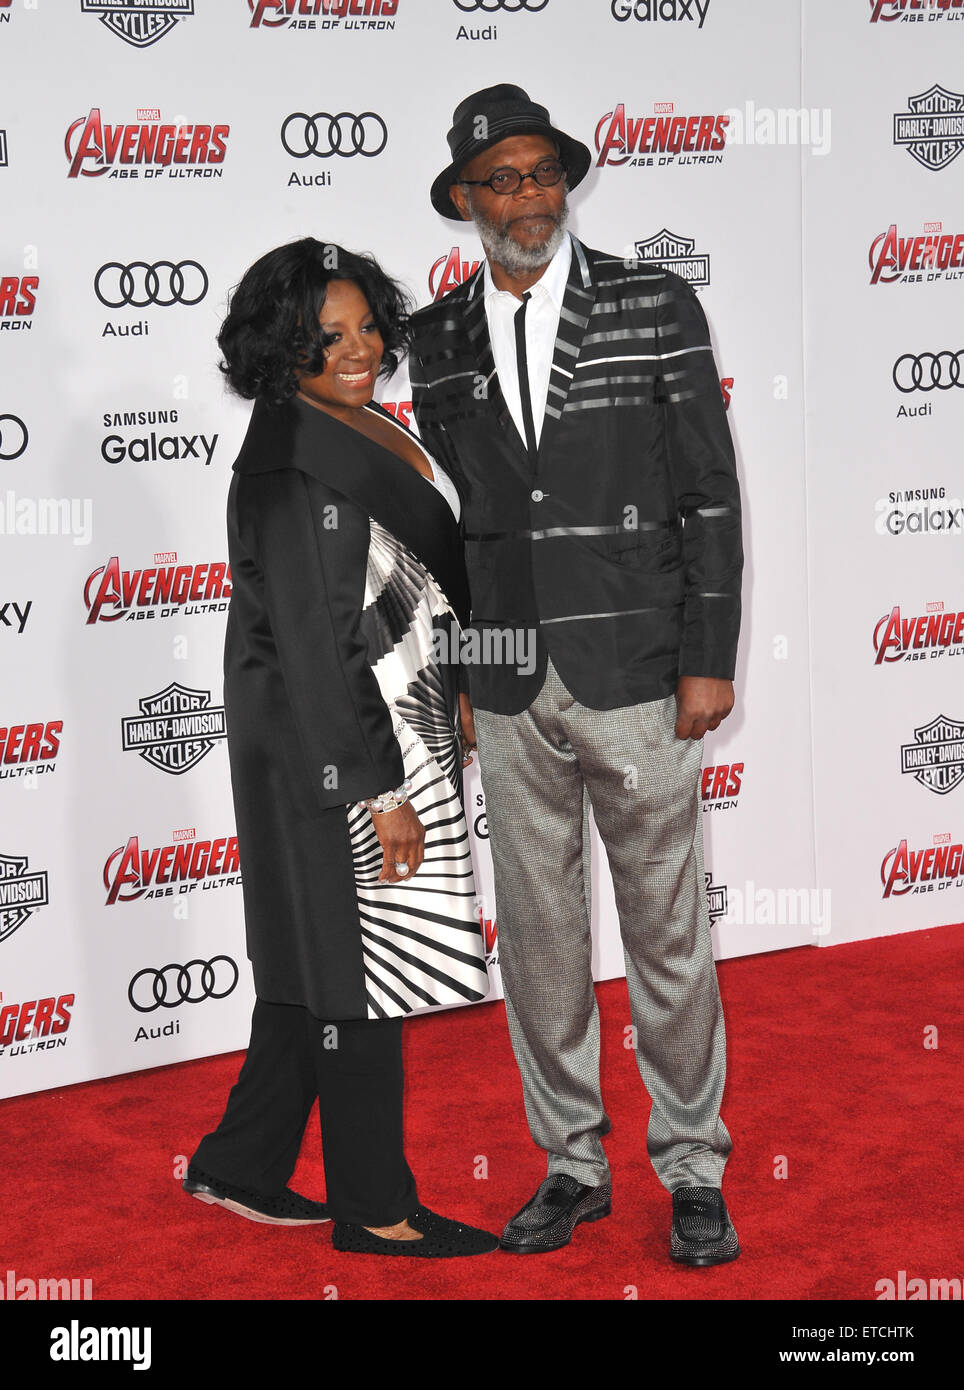 LOS ANGELES, CA - APRIL 13, 2015: Samuel L. Jackson & wife LaTanya Richardson at the world premiere of his movie 'Avengers: Age of Ultron' at the Dolby Theatre, Hollywood. Stock Photo